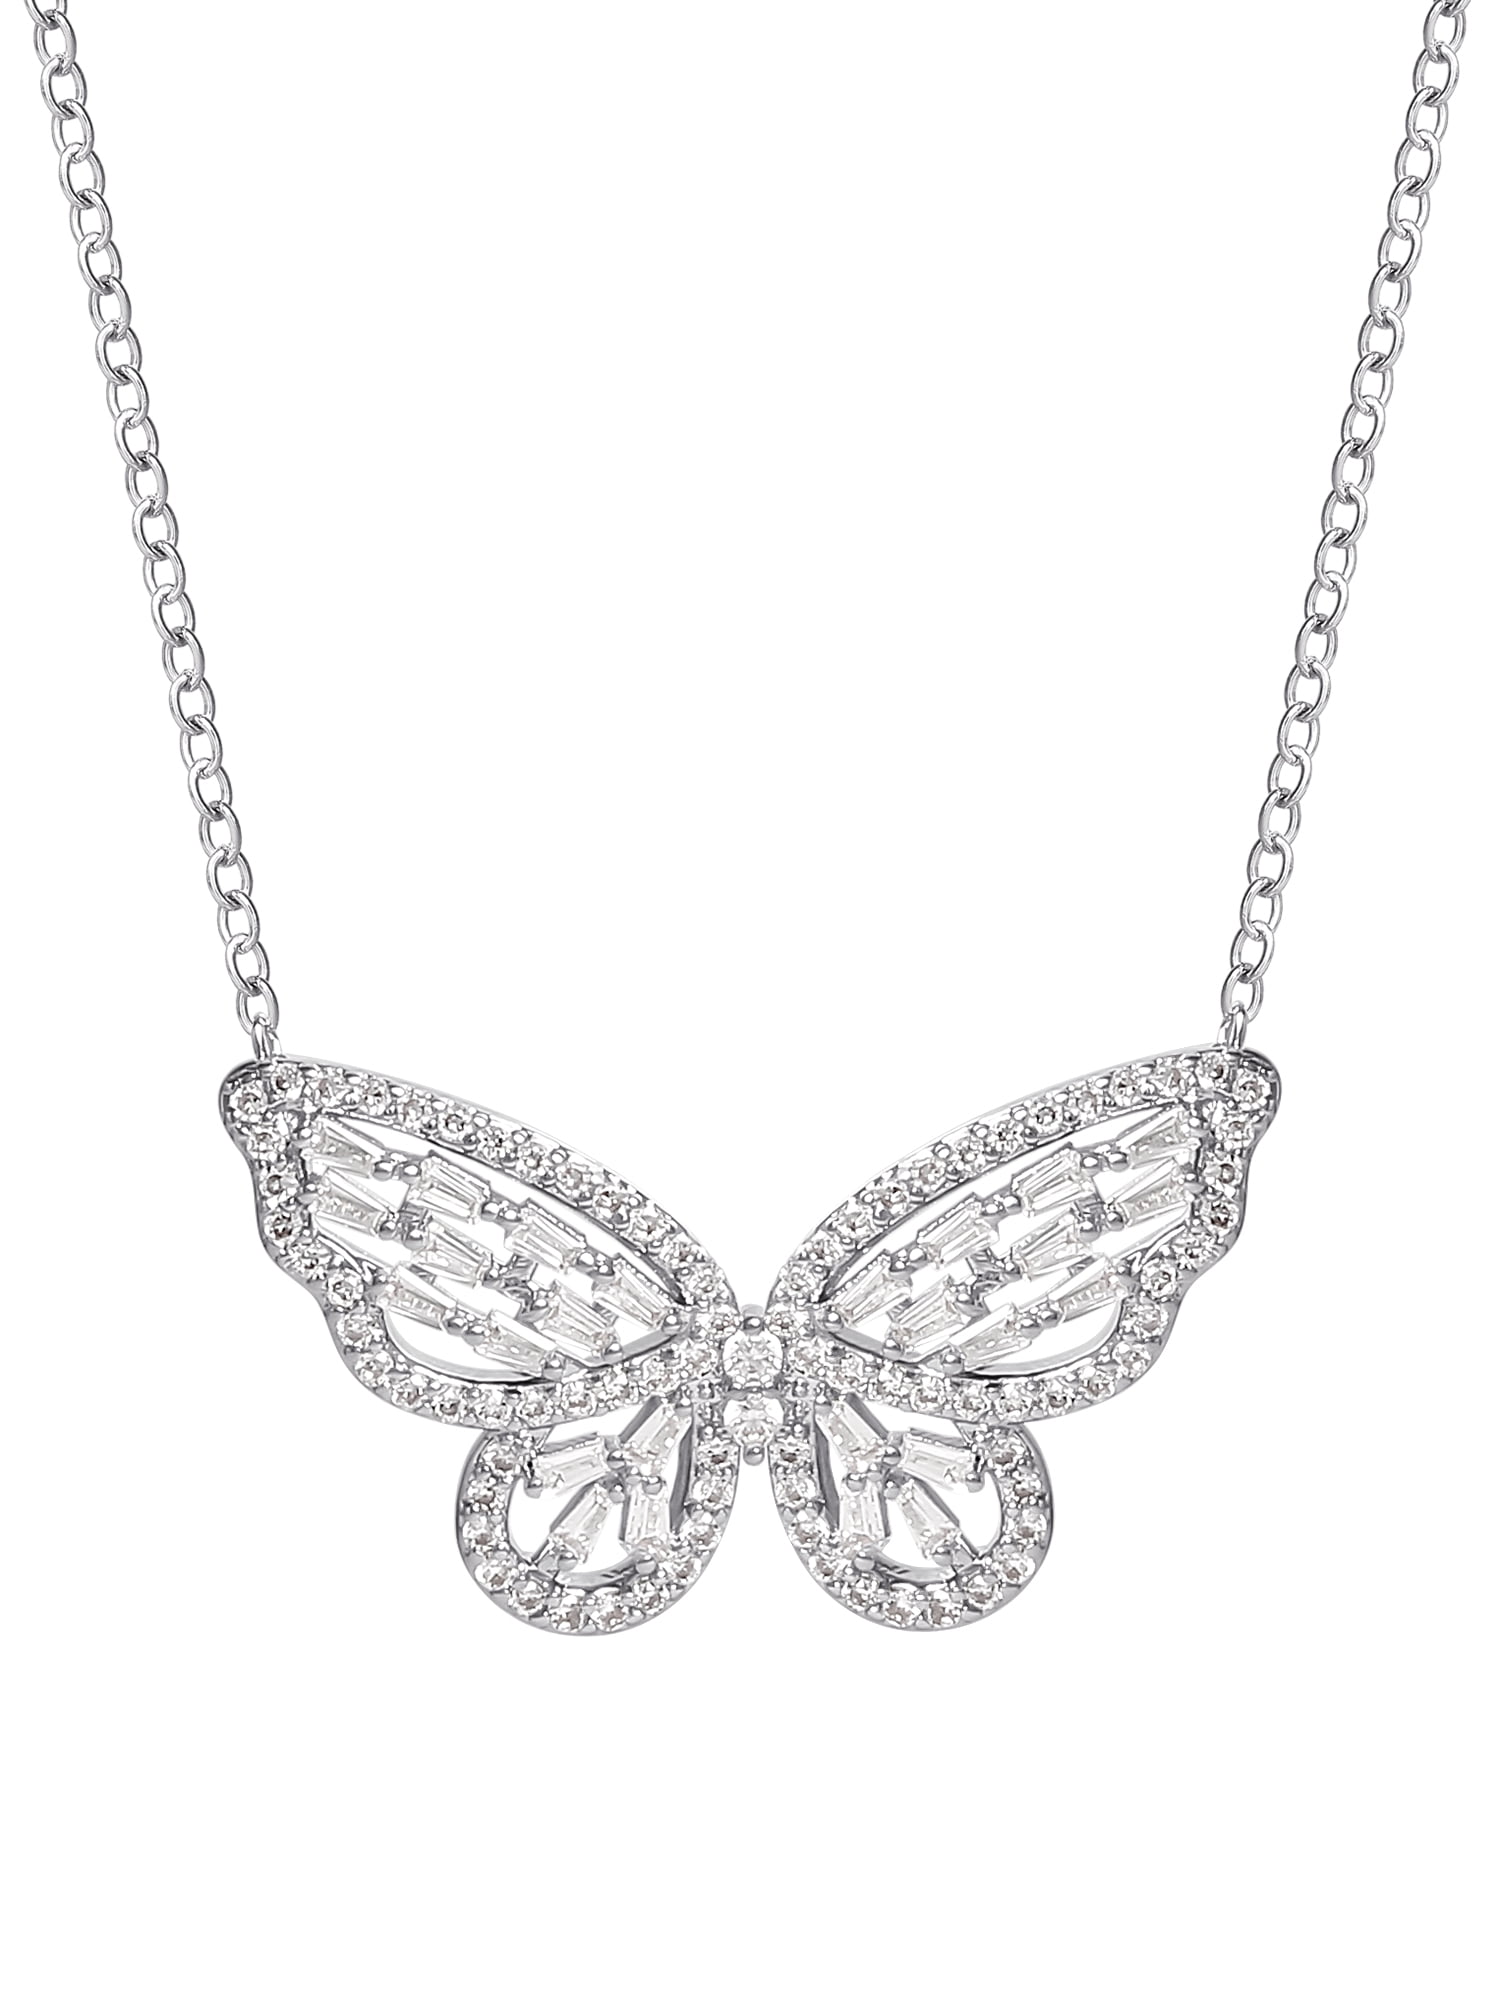 Fashion Jewelry Lovely Girls Silver Plated Butterfly Necklace Pendant New Style 